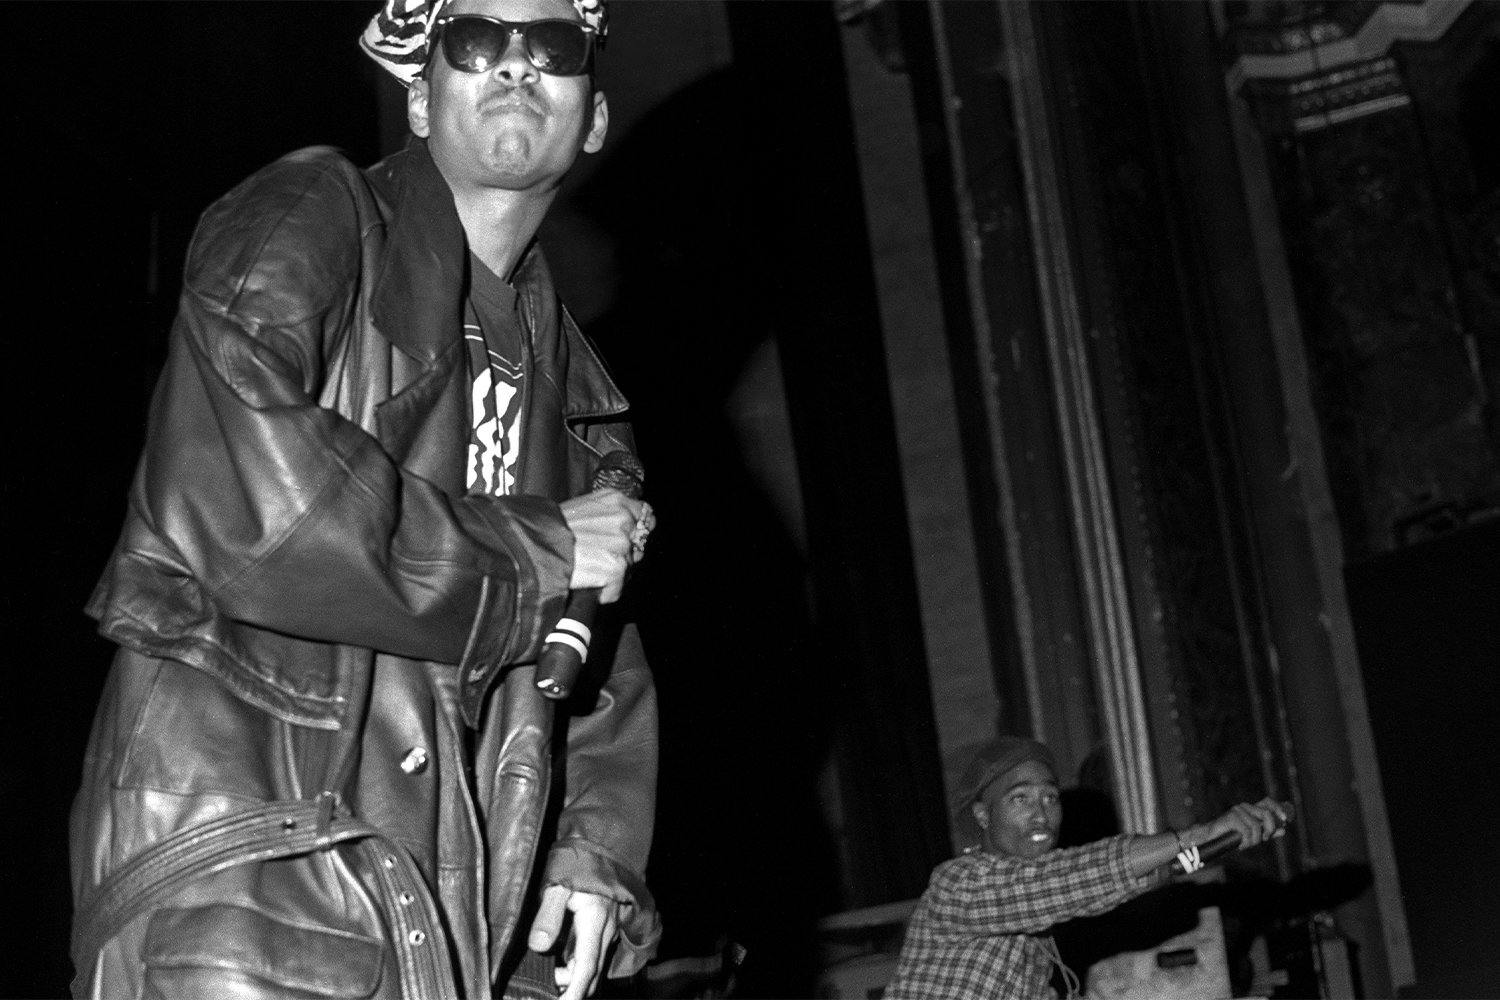 Shock G (aka Gregory Jacobs; Humpty Hump), Tupac Shakur and Rap Group Digital Underground performs at Newark Symphony Hall on April 10, 1990 in Newark, New Jersey. (Photo by Al Pereira/Getty Images/Michael Ochs Archives)